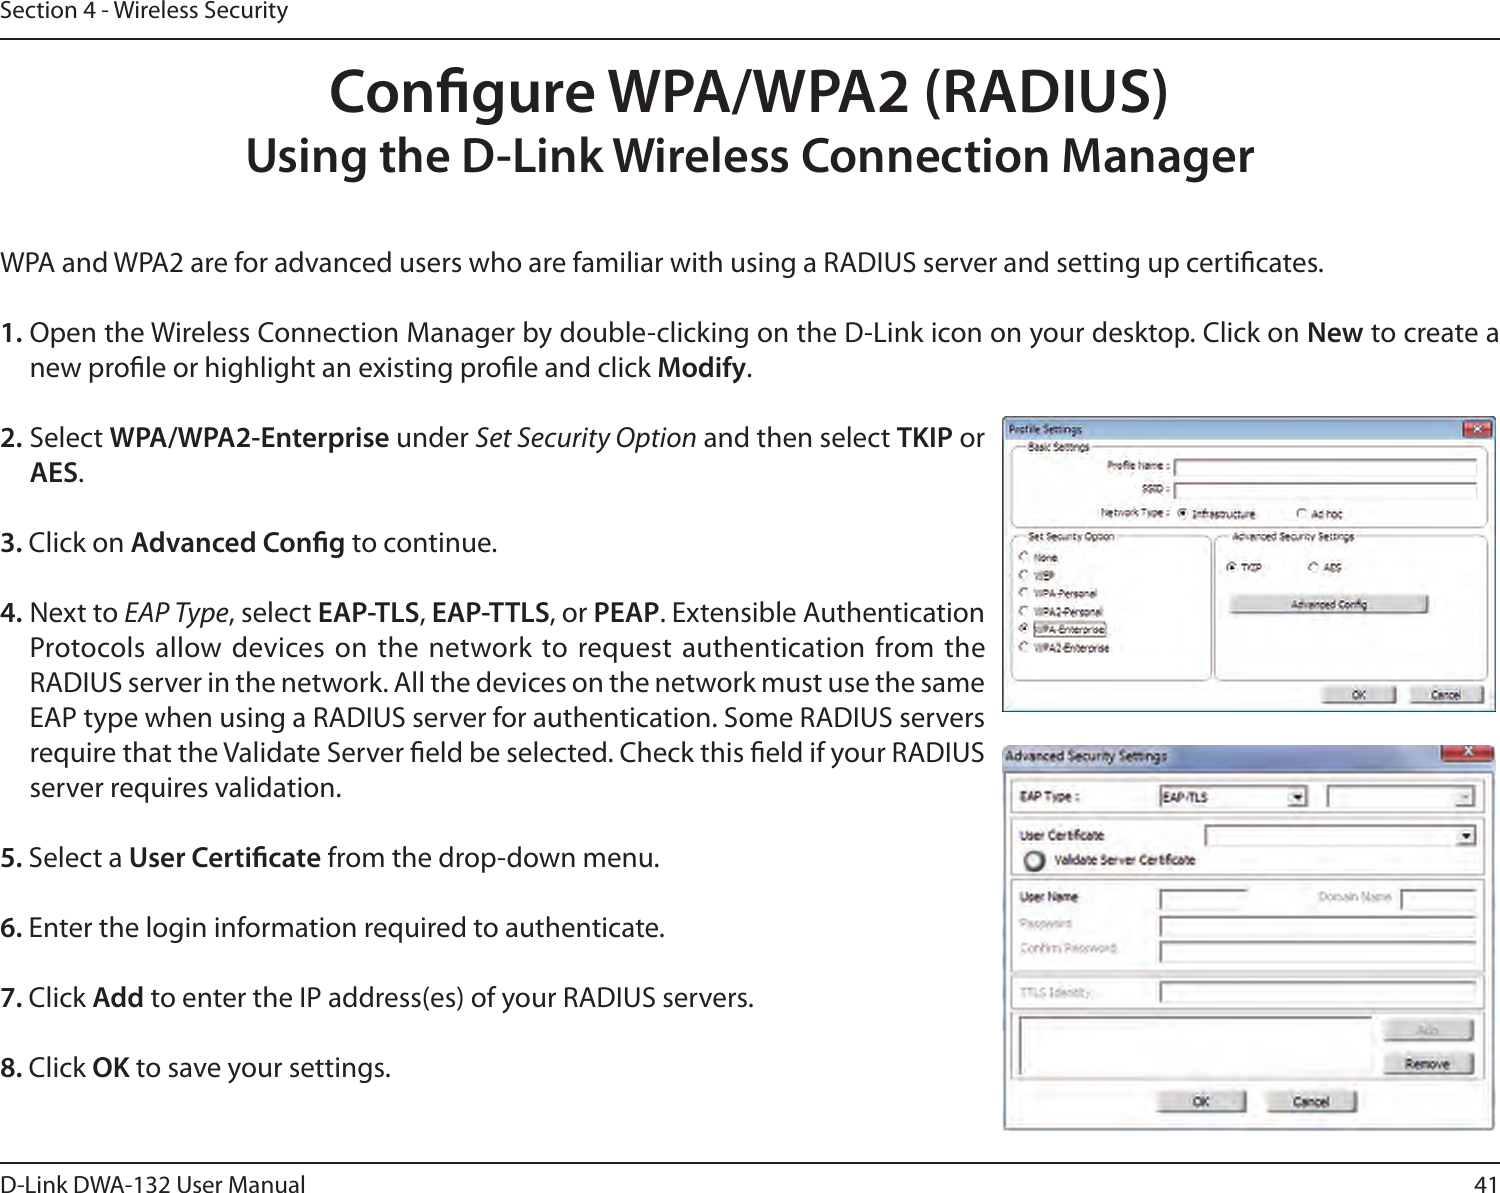 41D-Link DWA-132 User ManualSection 4 - Wireless SecurityCongure WPA/WPA2 (RADIUS)Using the D-Link Wireless Connection ManagerWPA and WPA2 are for advanced users who are familiar with using a RADIUS server and setting up certicates.1. Open the Wireless Connection Manager by double-clicking on the D-Link icon on your desktop. Click on New to create a new prole or highlight an existing prole and click Modify. 2. Select WPA/WPA2-Enterprise under Set Security Option and then select TKIP or AES.3. Click on Advanced Cong to continue.4. Next to EAP Type, select EAP-TLS, EAP-TTLS, or PEAP. Extensible Authentication Protocols allow devices on  the  network to request authentication from the RADIUS server in the network. All the devices on the network must use the same EAP type when using a RADIUS server for authentication. Some RADIUS servers require that the Validate Server eld be selected. Check this eld if your RADIUS server requires validation.5. Select a User Certicate from the drop-down menu.6. Enter the login information required to authenticate.7. Click Add to enter the IP address(es) of your RADIUS servers.8. Click OK to save your settings.